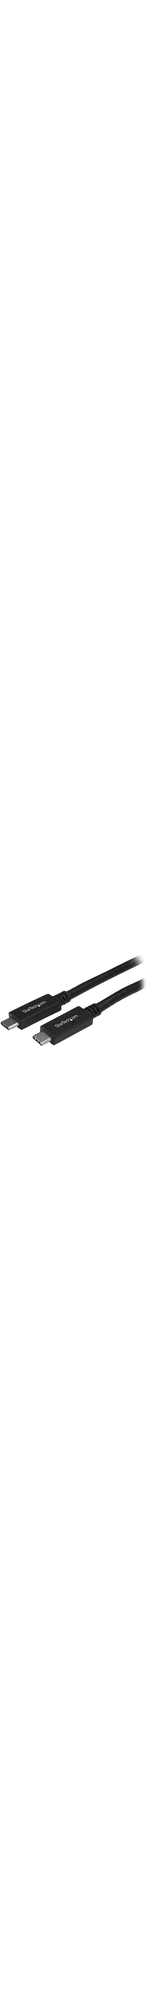 StarTech.com 1m 3ft USB-C Cable - M/M - USB 3.1 10Gbps - USB Type-C Cable - Nickel Plated - Black